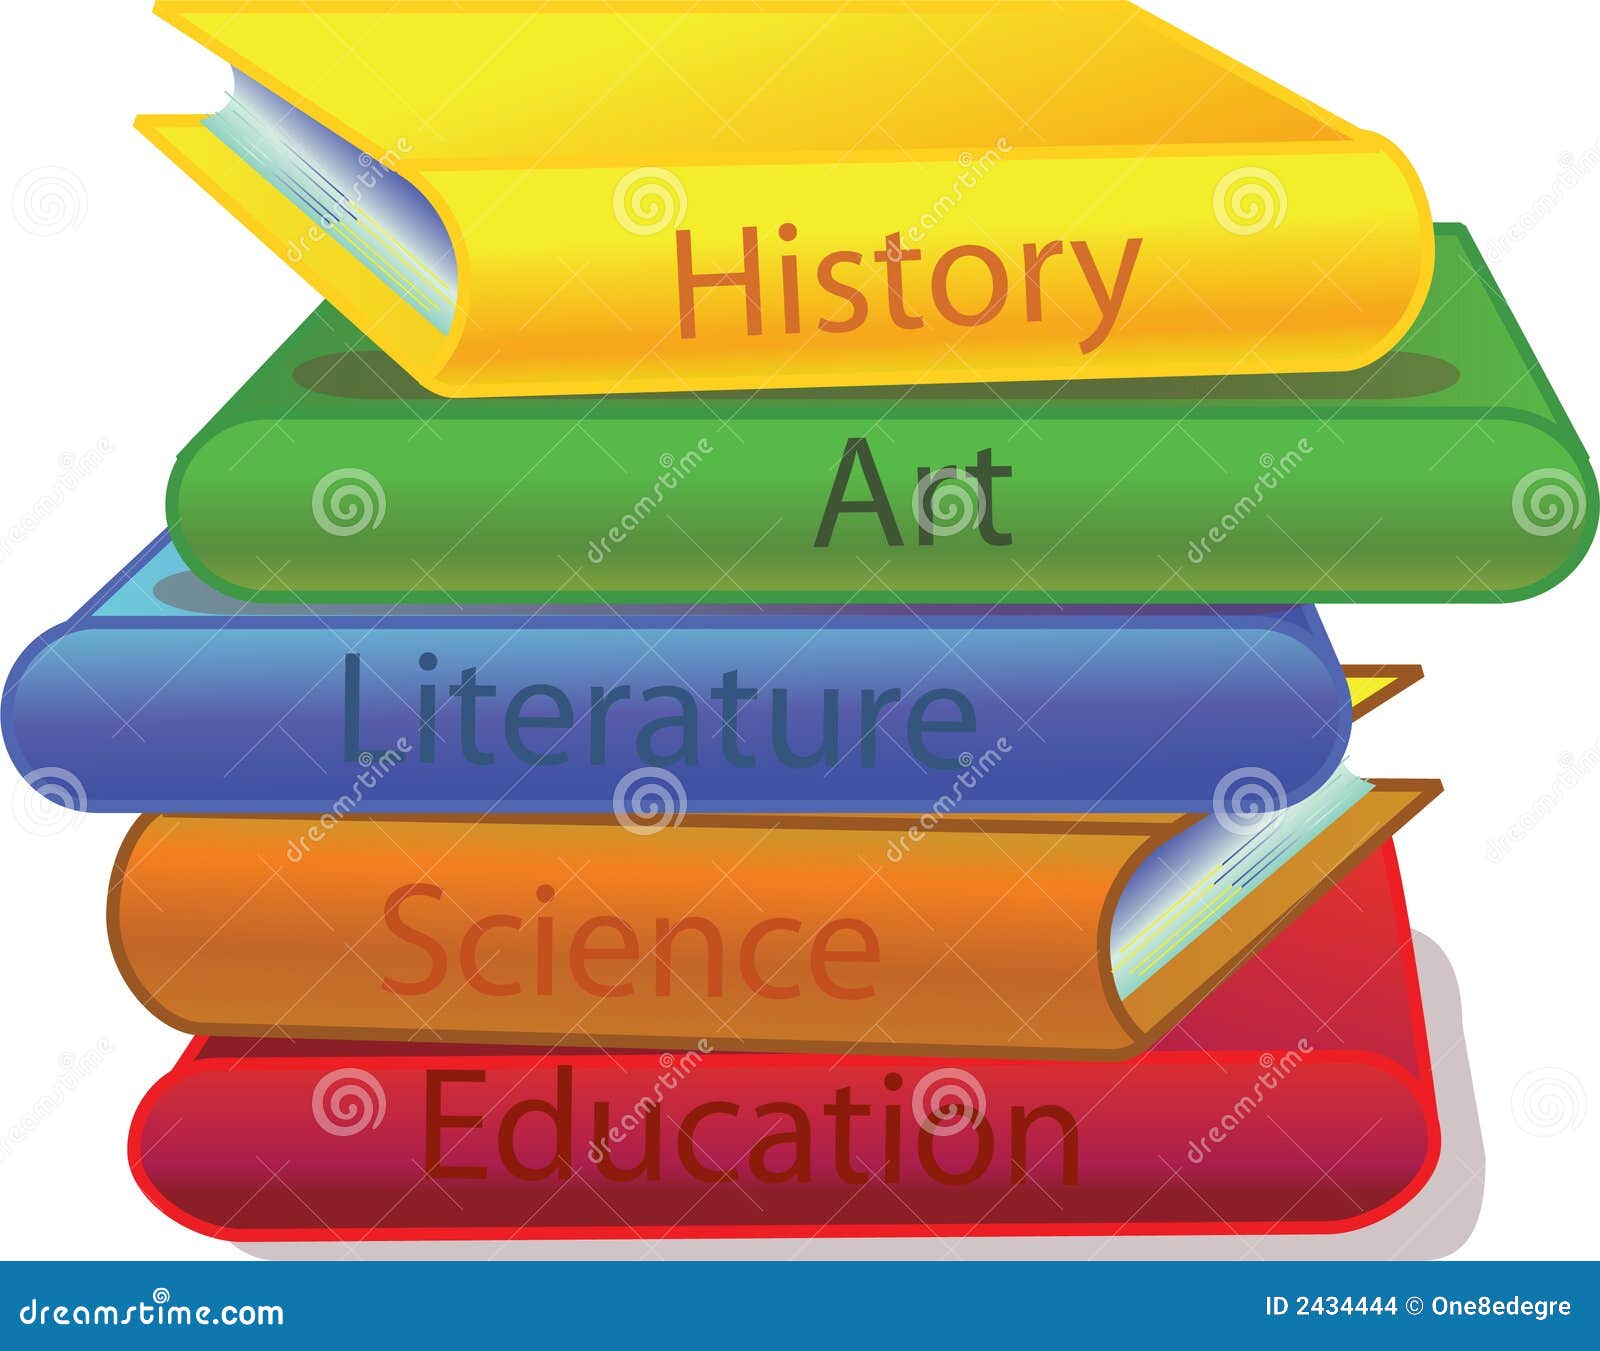 literature books 2434444 Graduation Clipart // Handpicked graphics and images